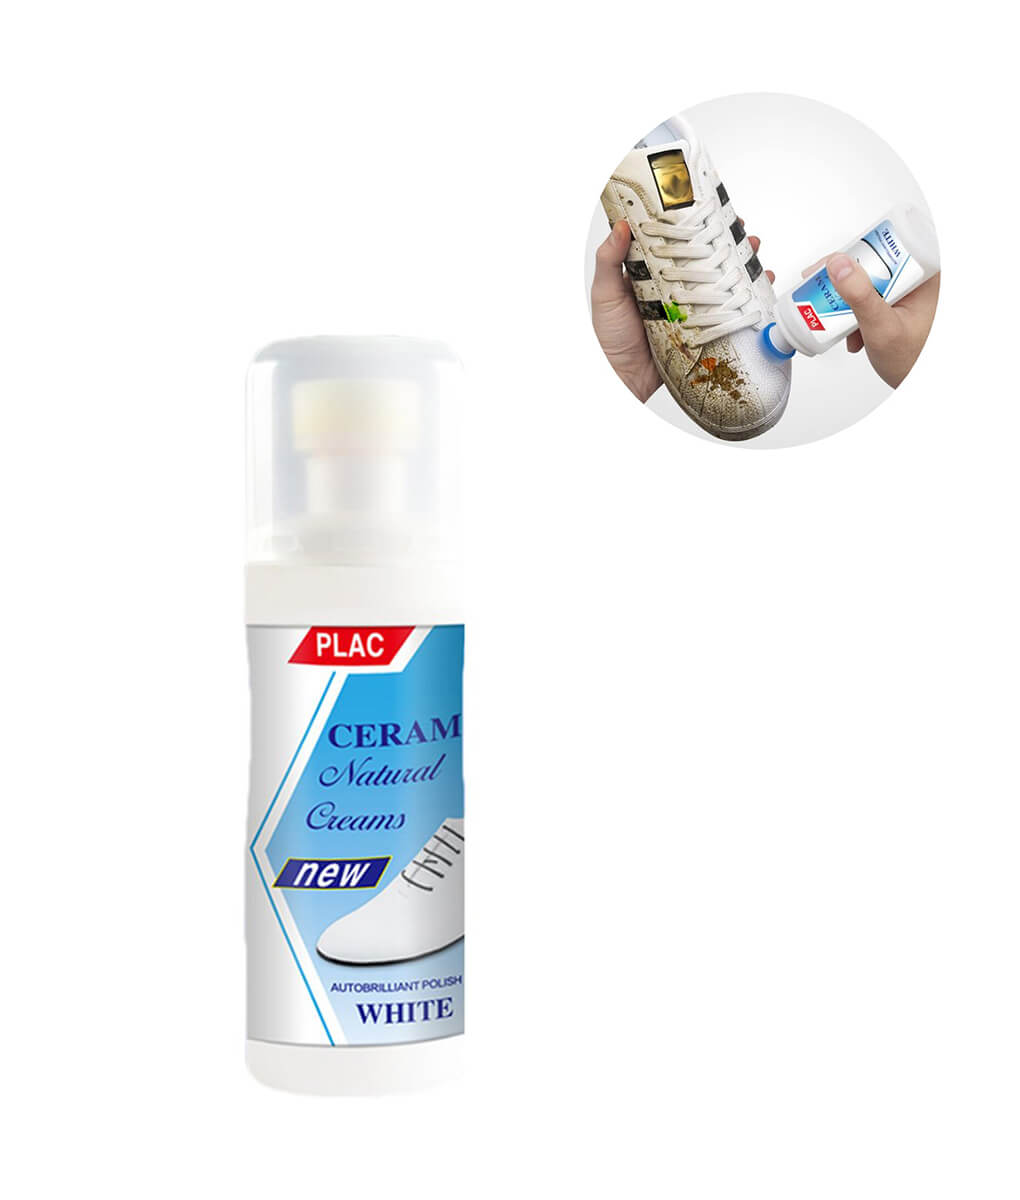 White Shoes Cleaner – JOOPZY